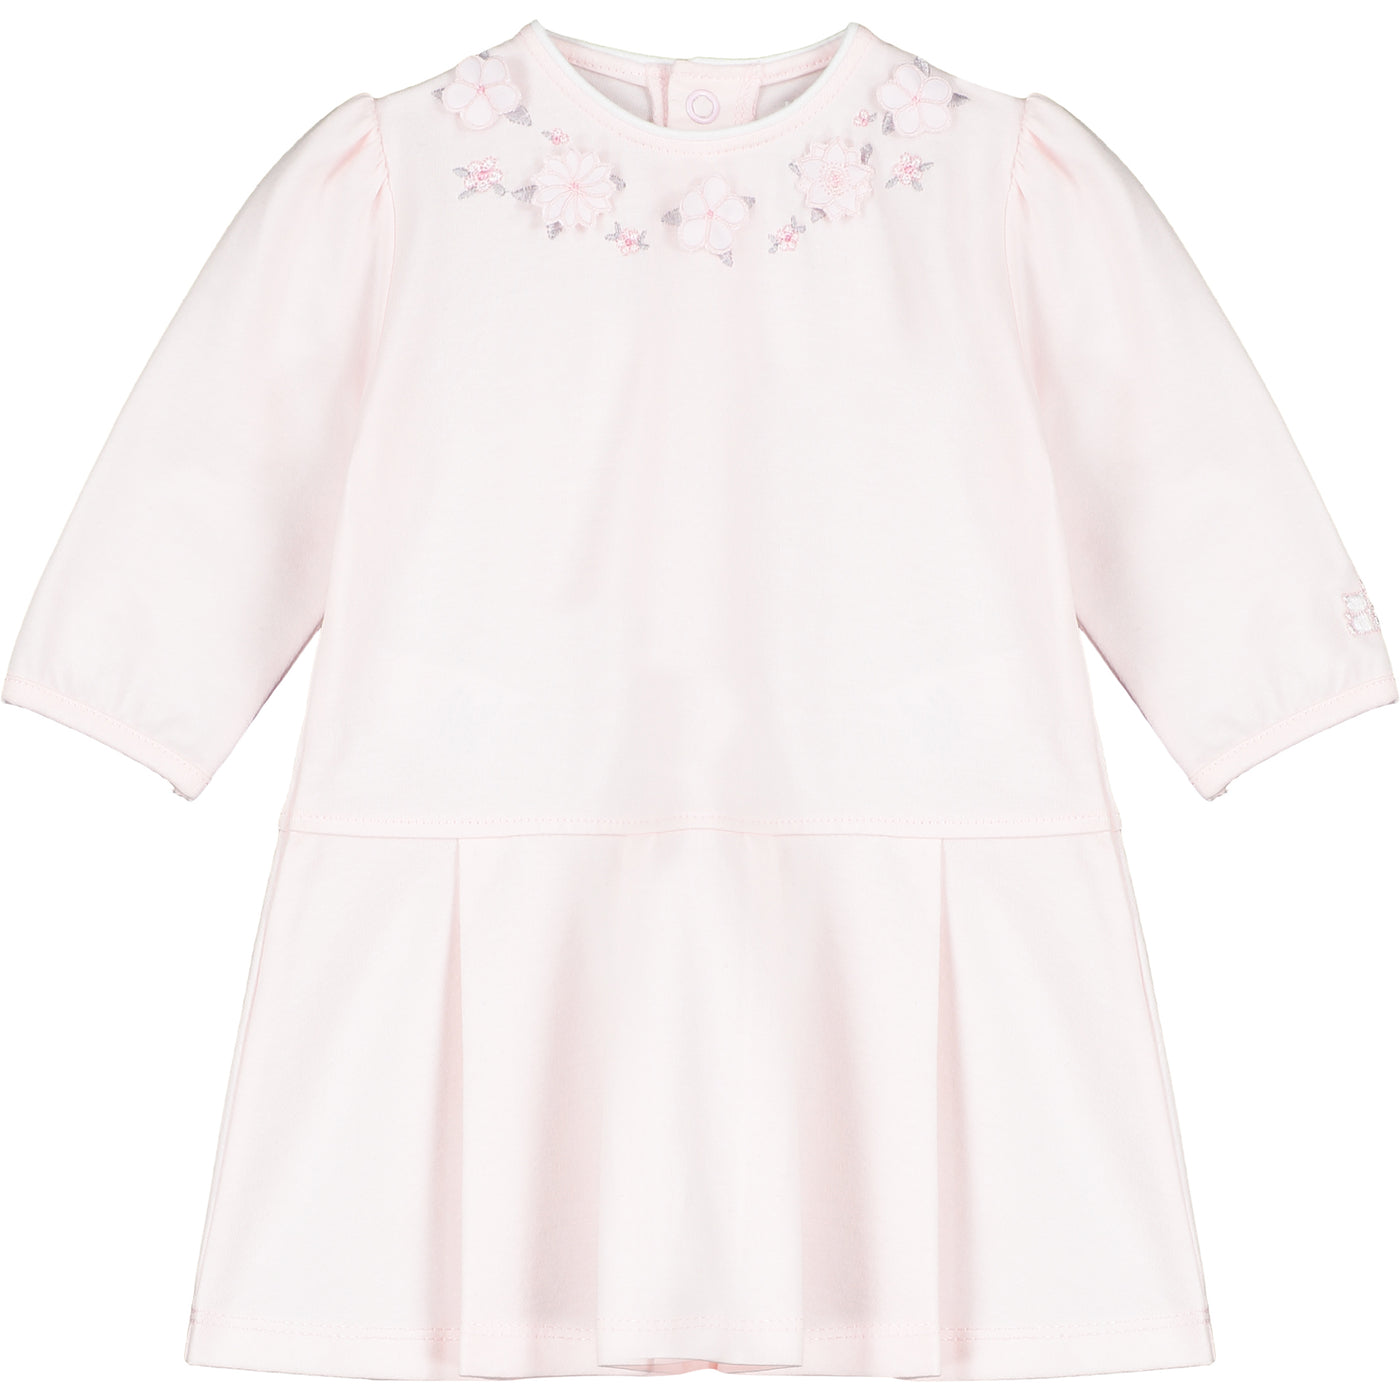 Celeste Pink Dress with Flower Detail & Tights